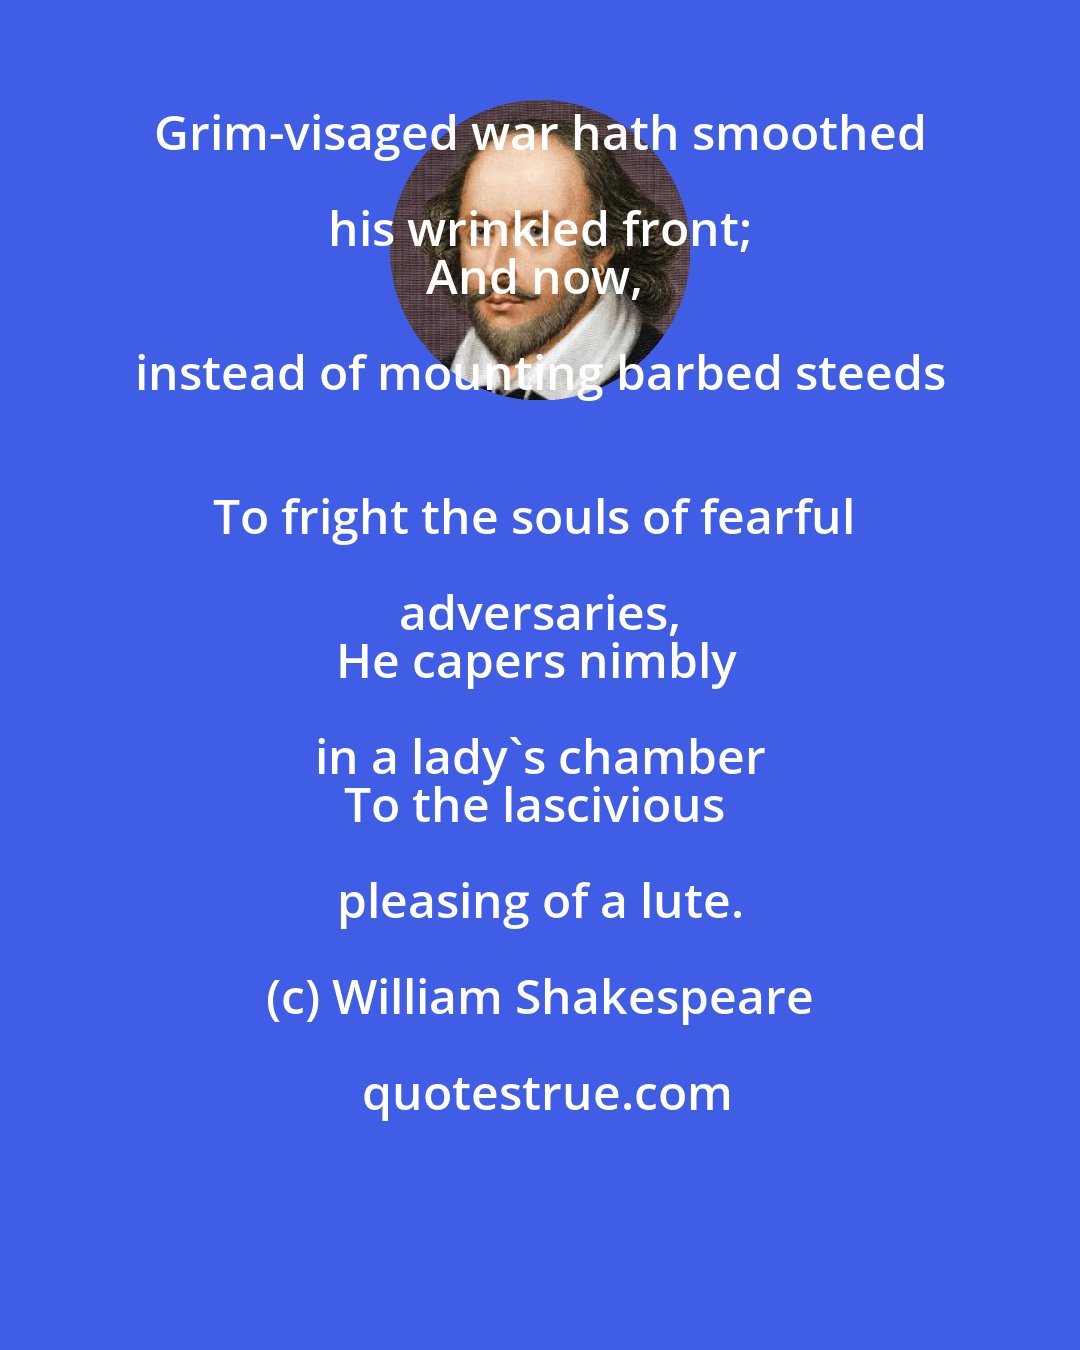 William Shakespeare: Grim-visaged war hath smoothed his wrinkled front; 
And now, instead of mounting barbed steeds 
To fright the souls of fearful adversaries, 
He capers nimbly in a lady's chamber 
To the lascivious pleasing of a lute.